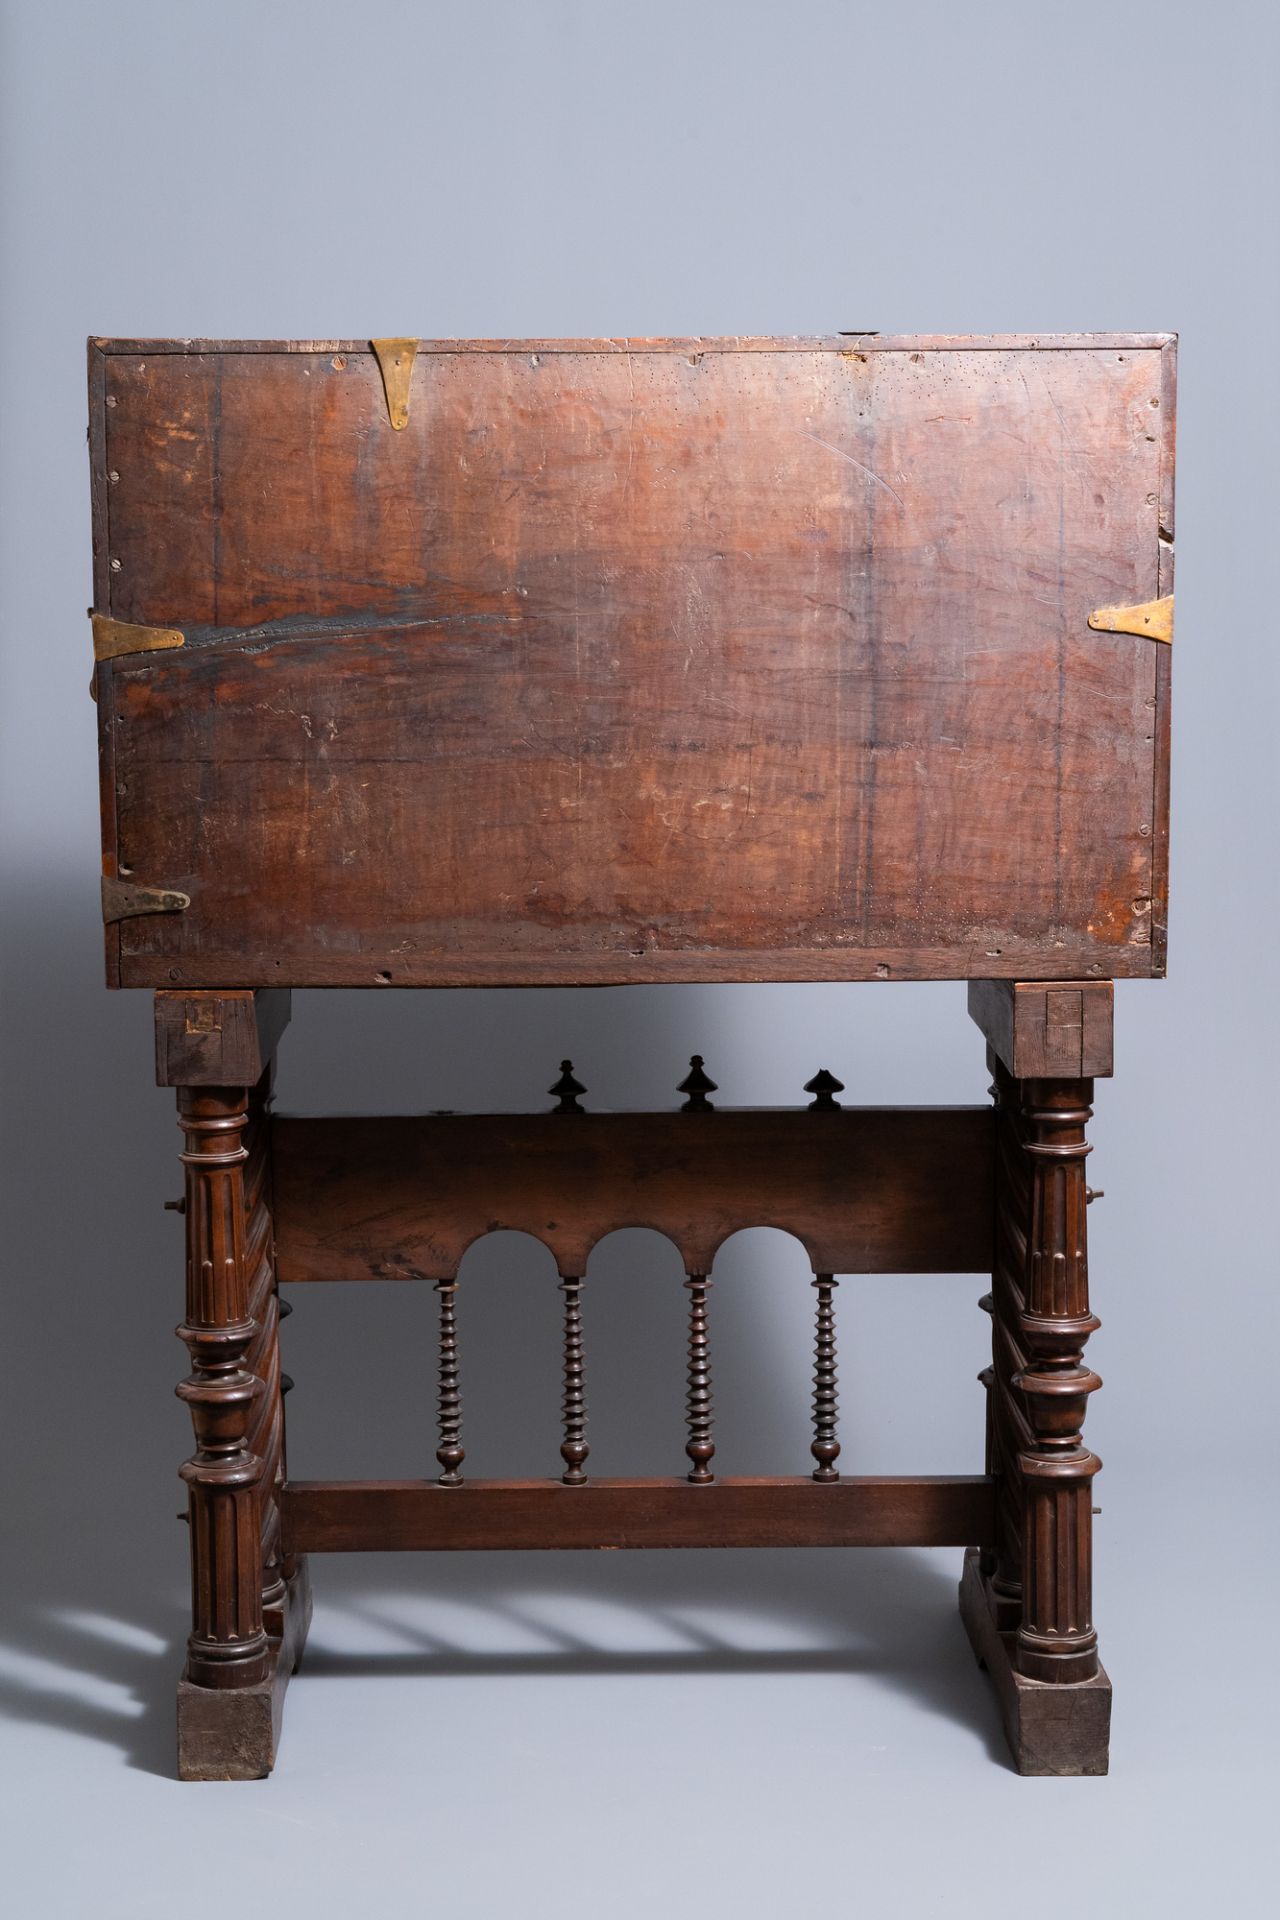 A Spanish bronze-mounted oak 'bargue–o' or cabinet on stand, 16th C. - Image 8 of 16